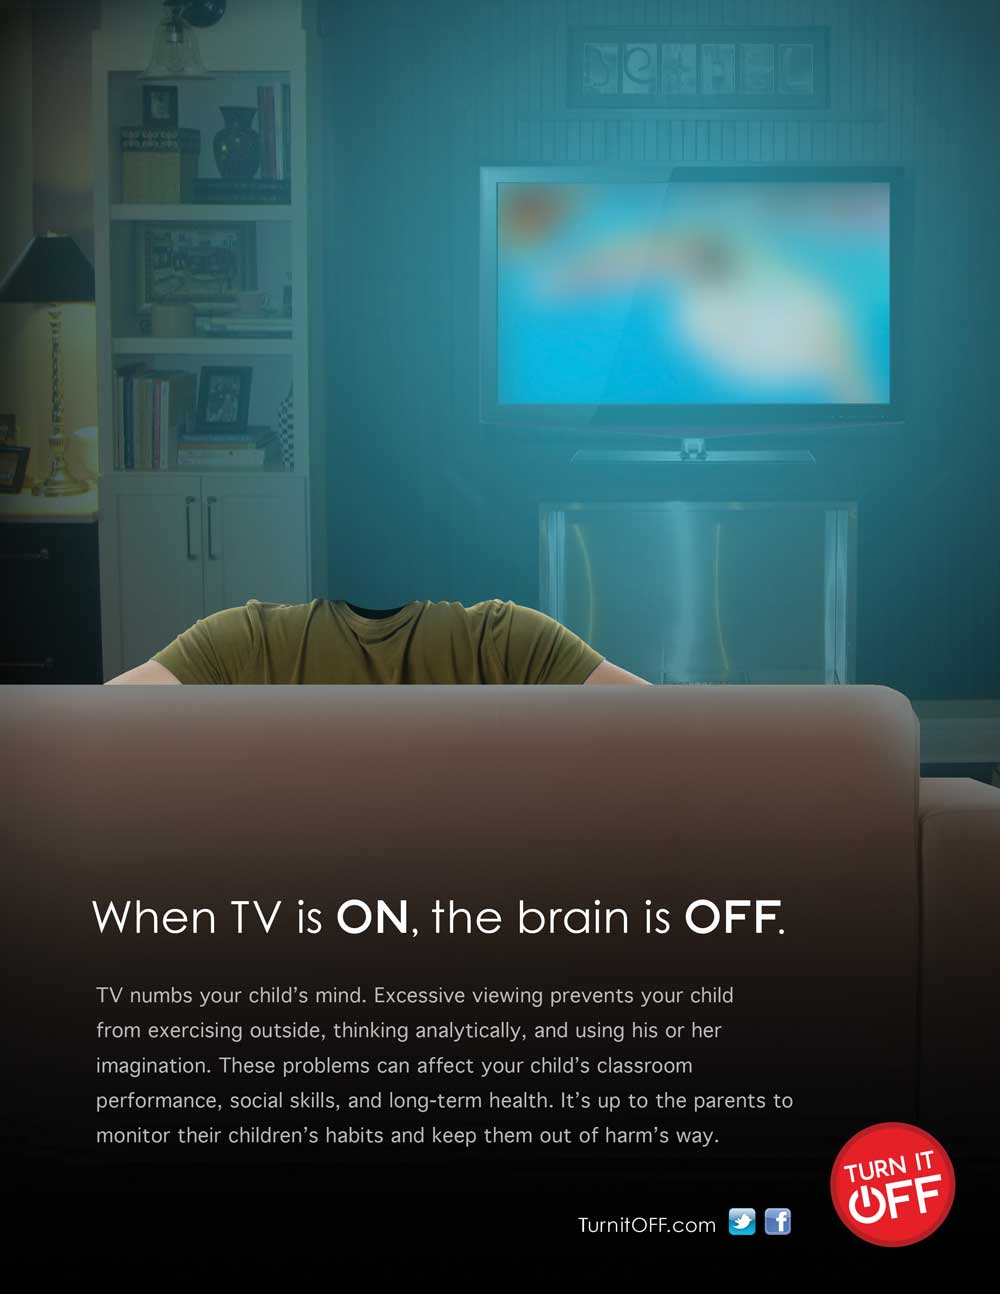 Turn it OFF Ad Campaign